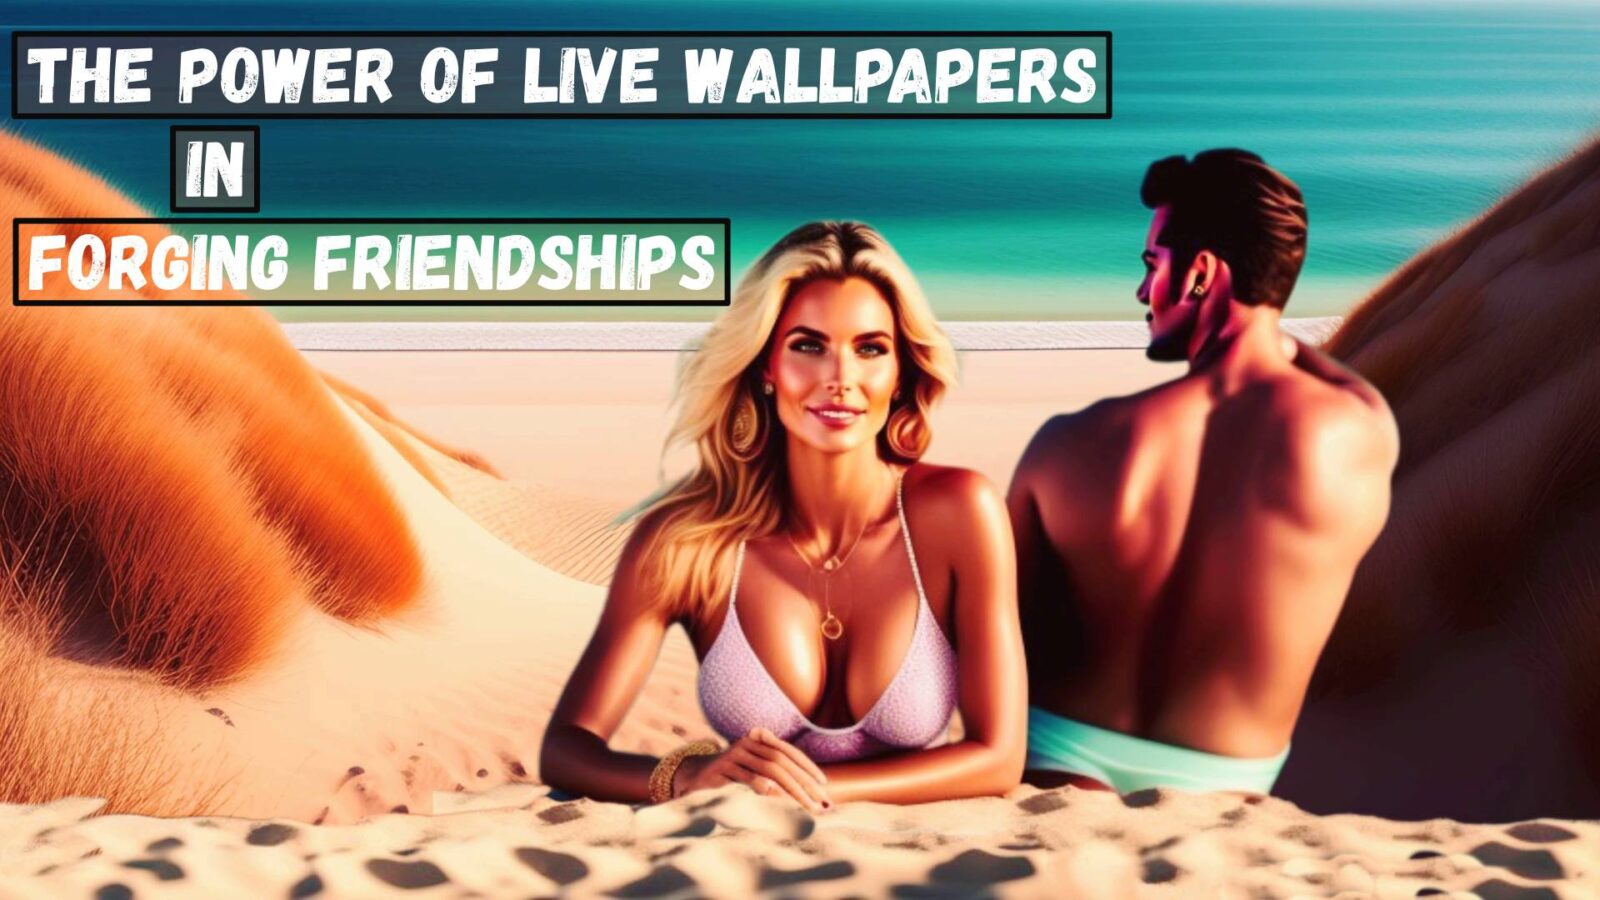 LiveWallpapers4Free.com | From Desktops to Hearts: The Power of Live Wallpapers in Forging Friendships